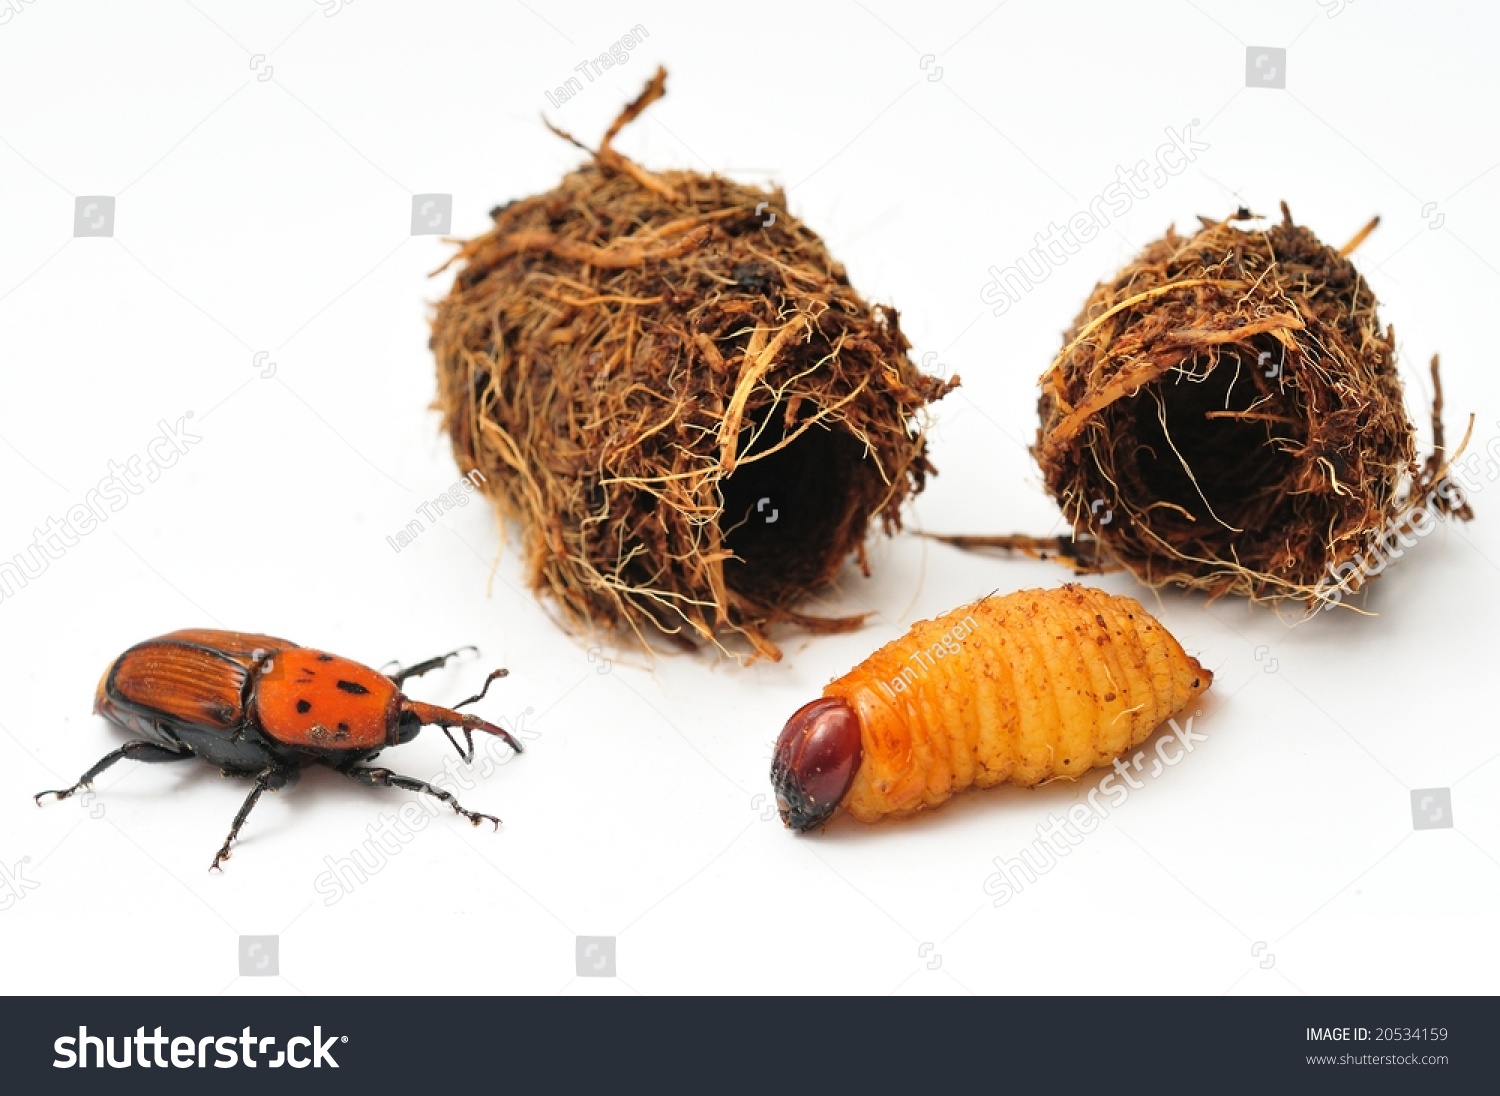 Red Palm Weevil Larva Cocoon Adult Stock Photo 20534159 - Shutterstock